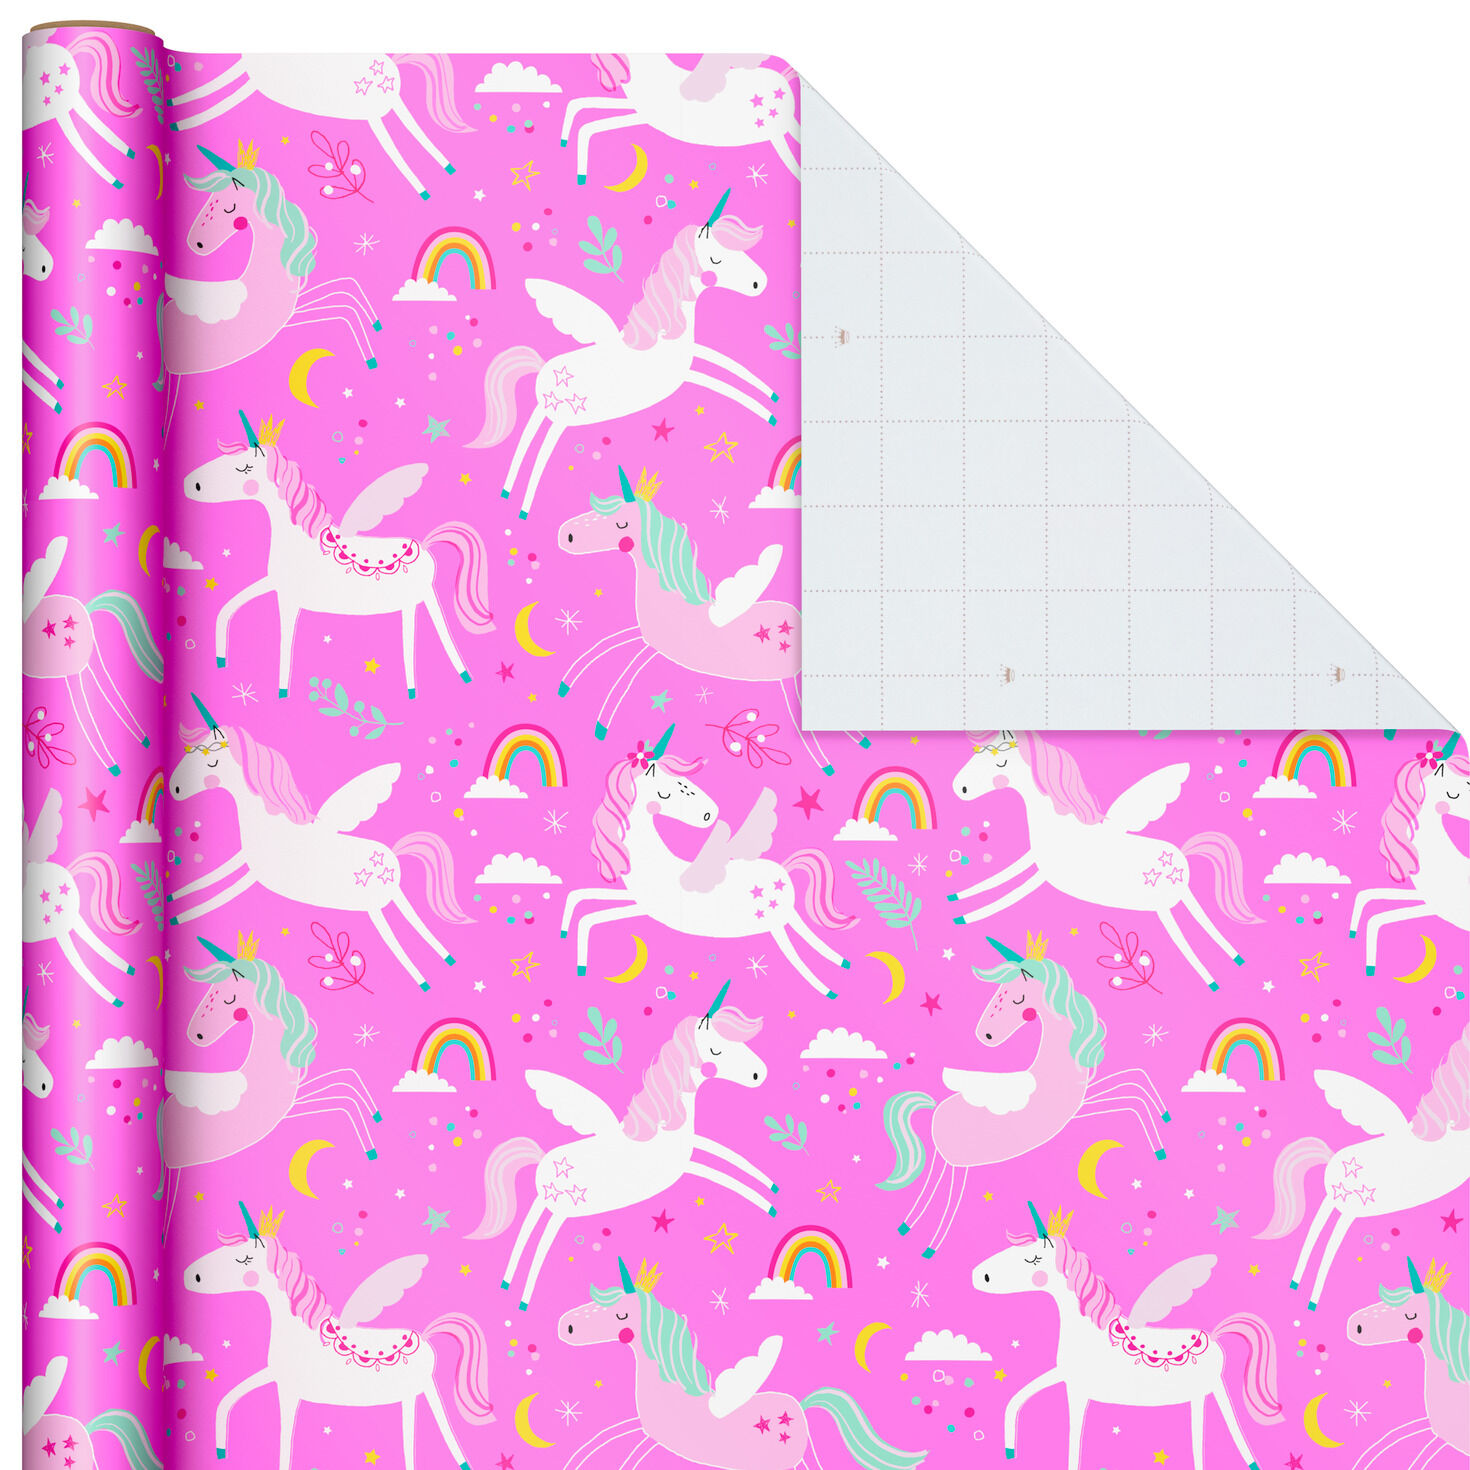 Lovely gift wrap 2 sheets and a free gift tag for a Baby Girl Gift Wrapping Paper